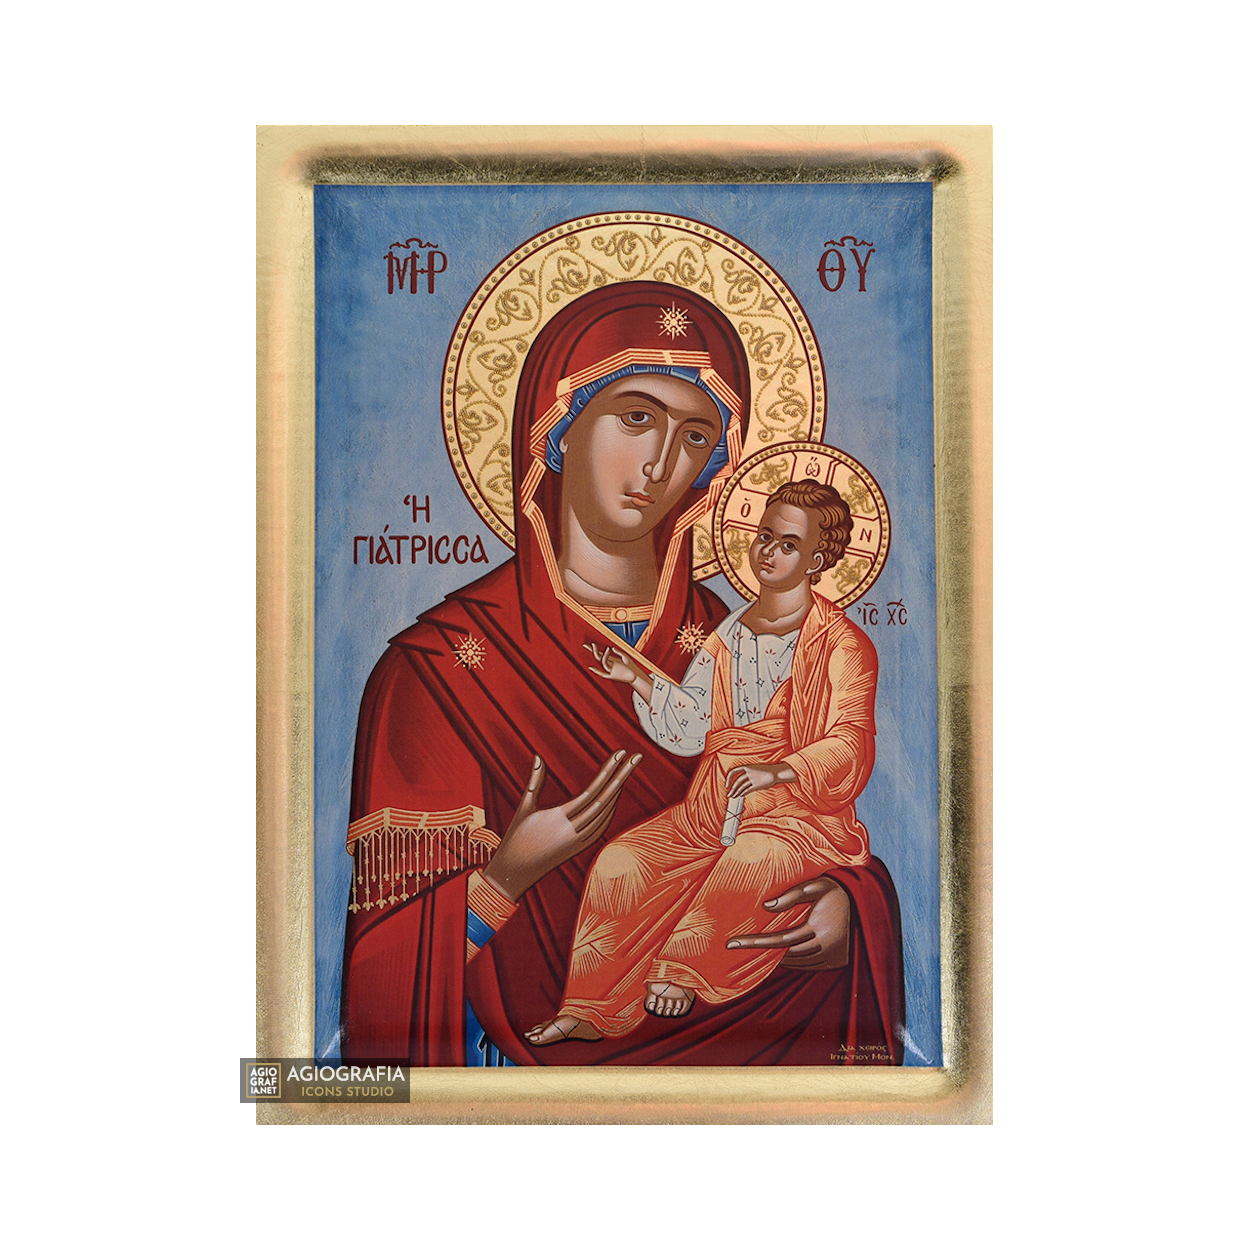 Virgin Mary the Healer Greek Orthodox Wood Icon with Gold Leaf